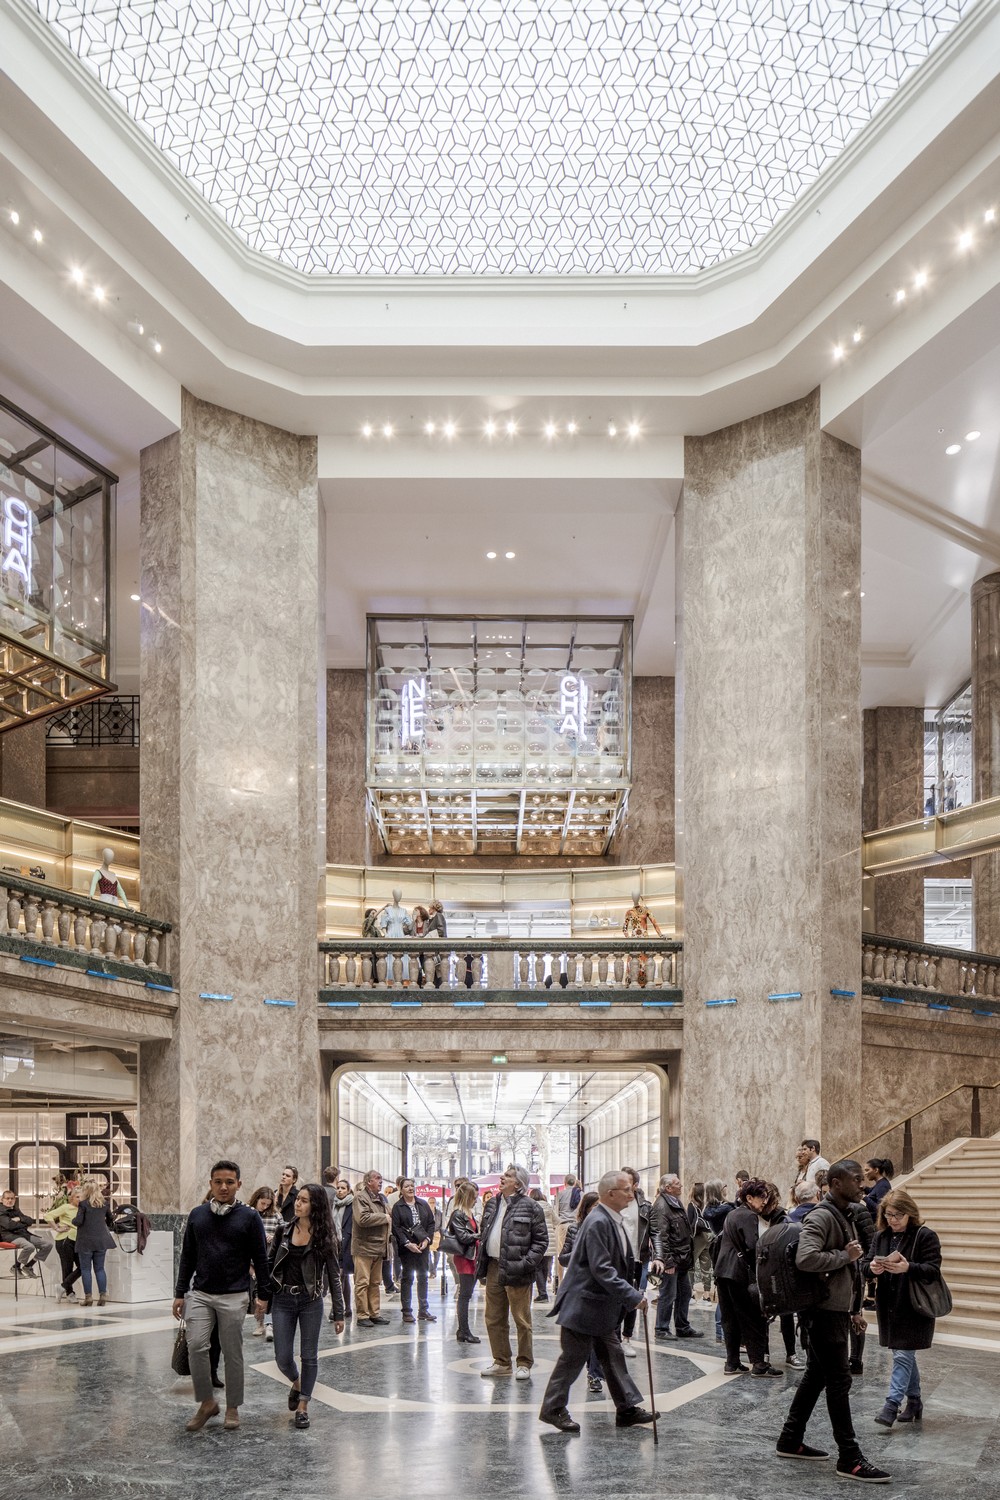 Galeries Lafayette Opens A New Circular Fashion Space in Paris